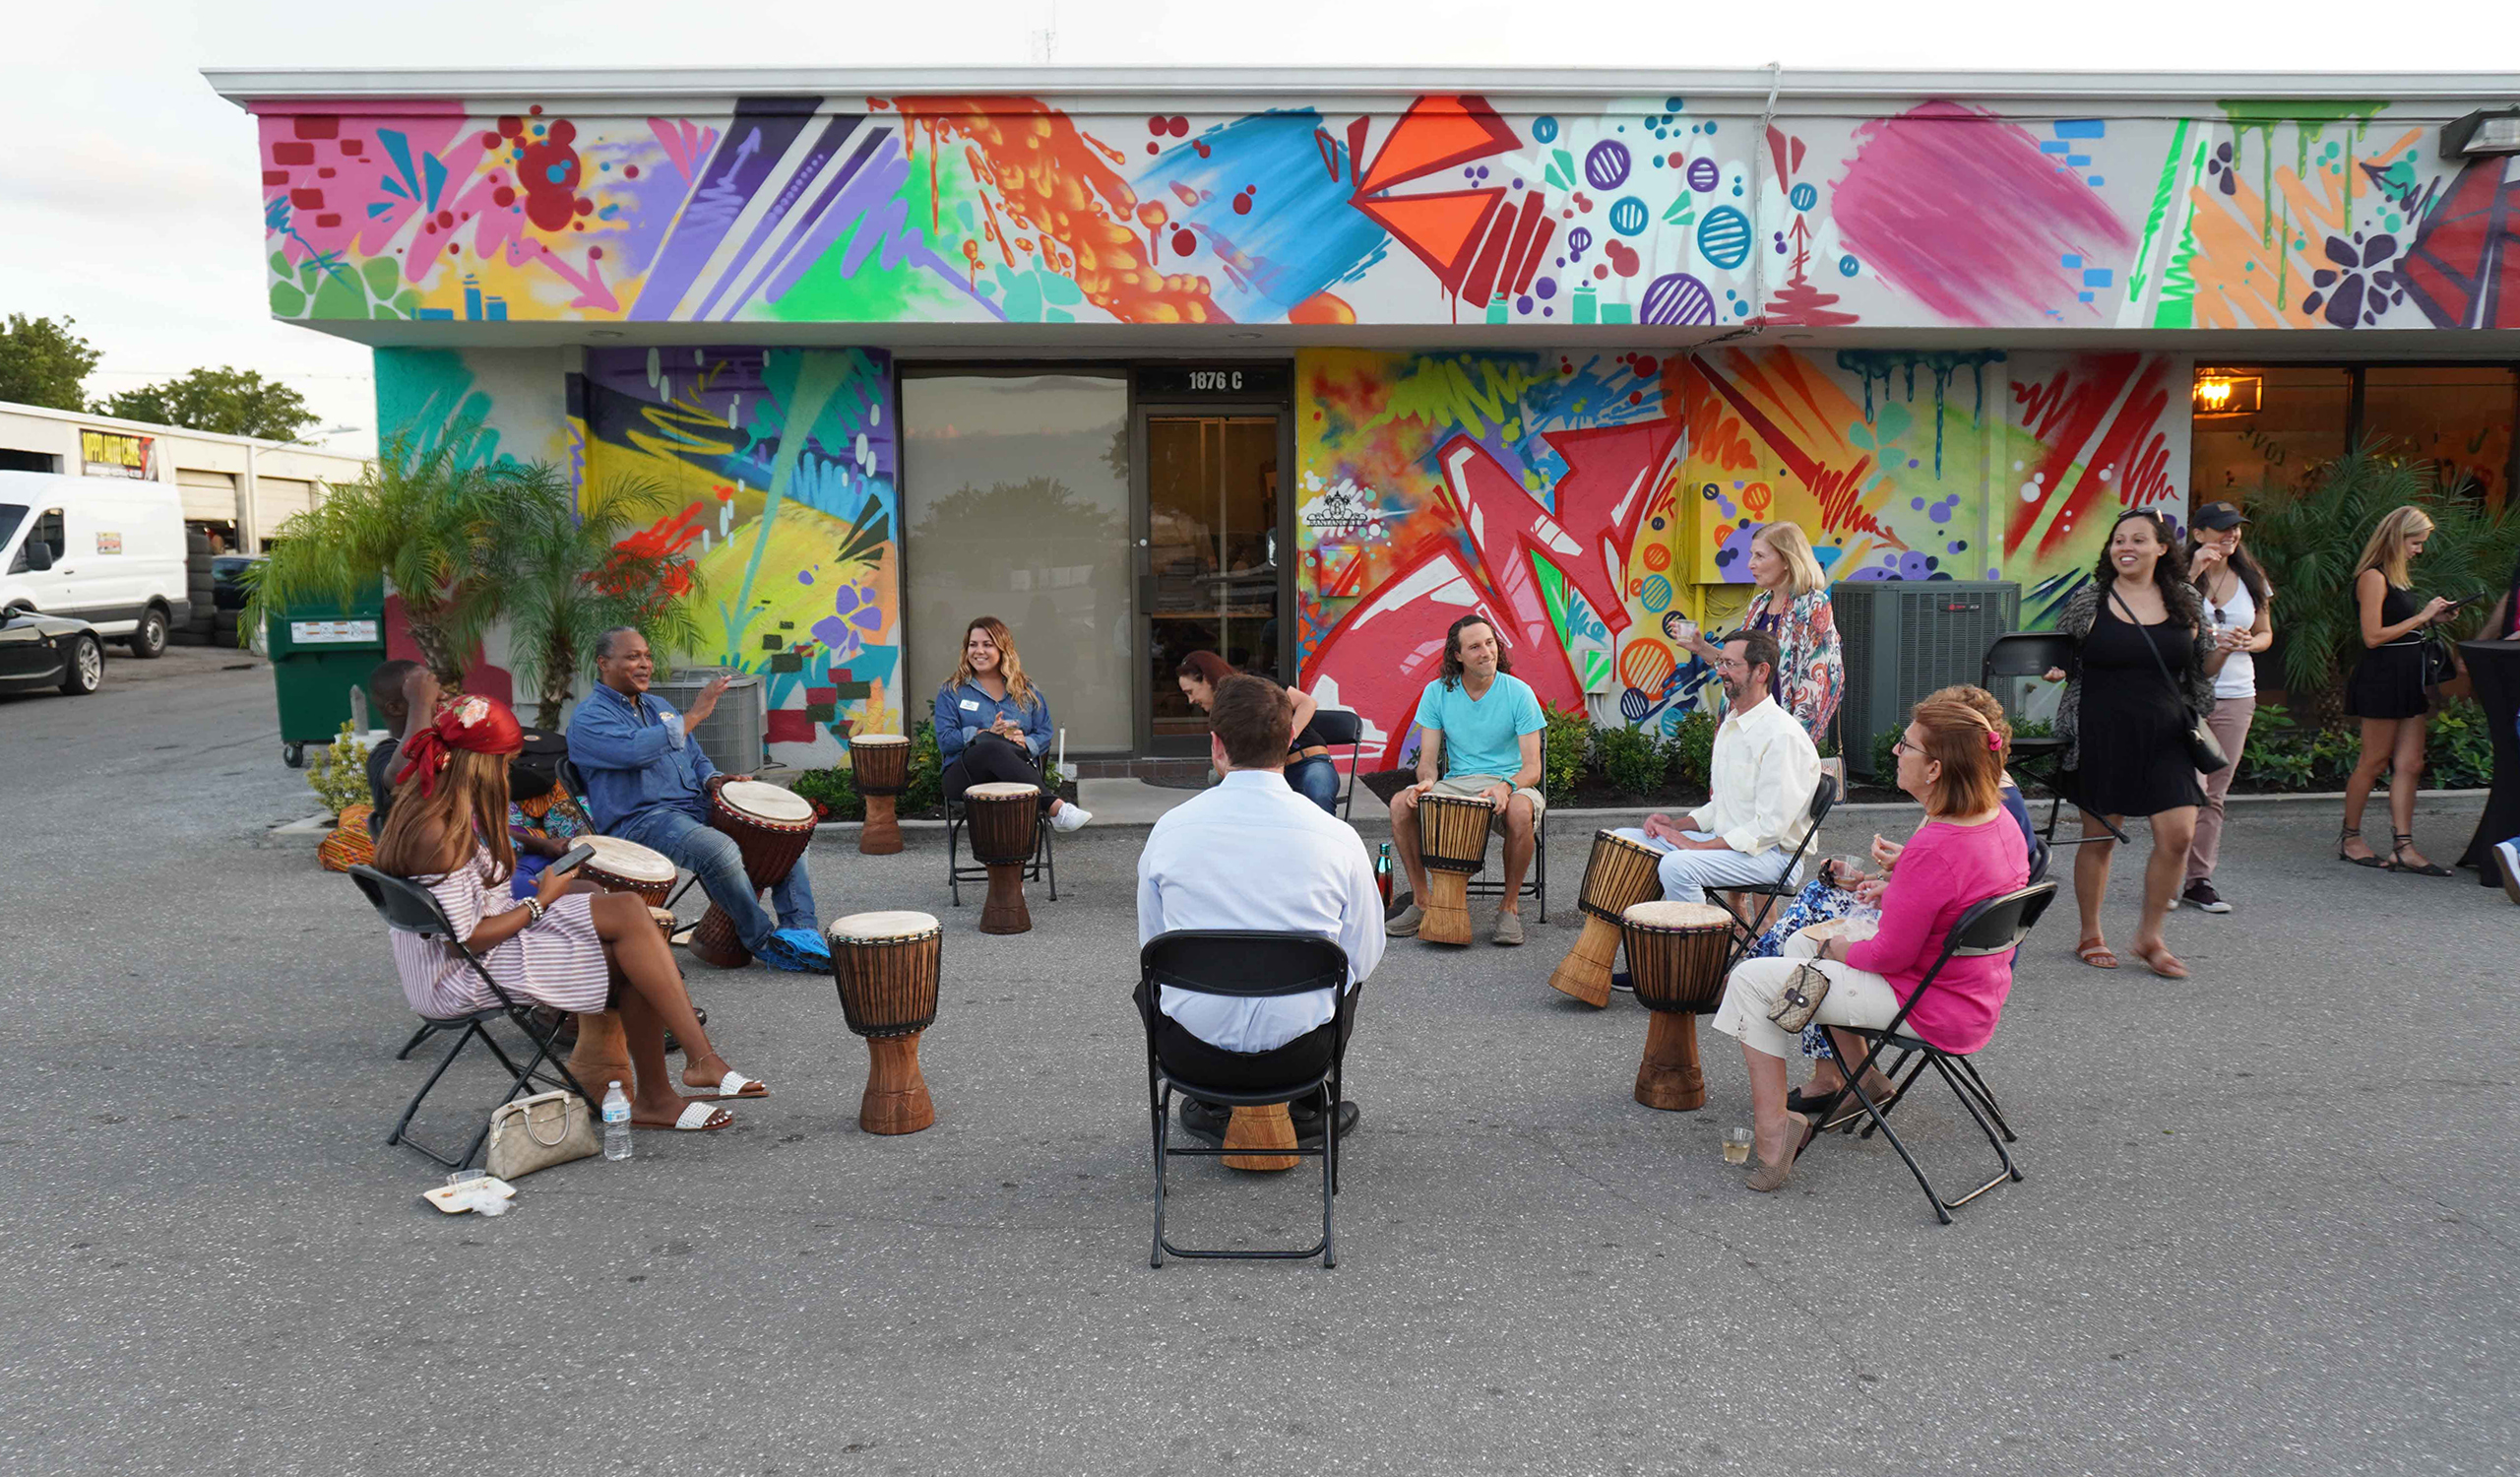 Drum circle outside colorful mural in Delray Beach at Andre Design District.